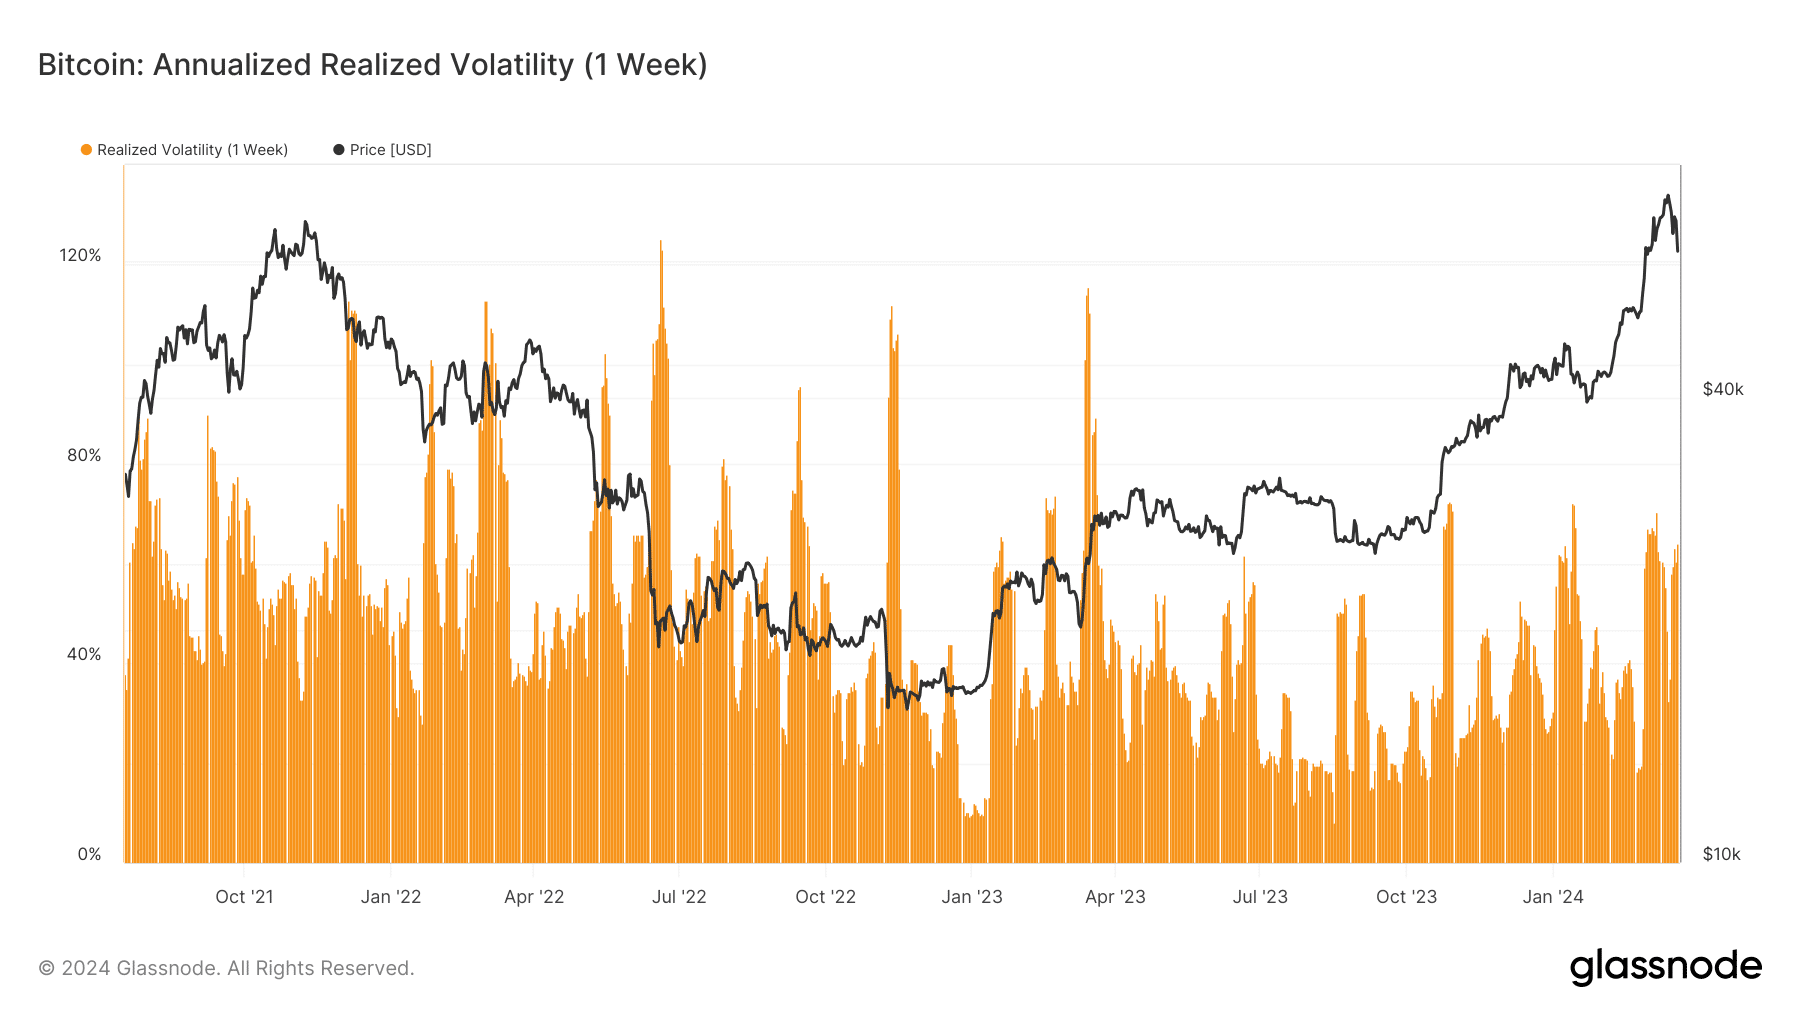 Bitcoin data shows a high level of risk and volatility